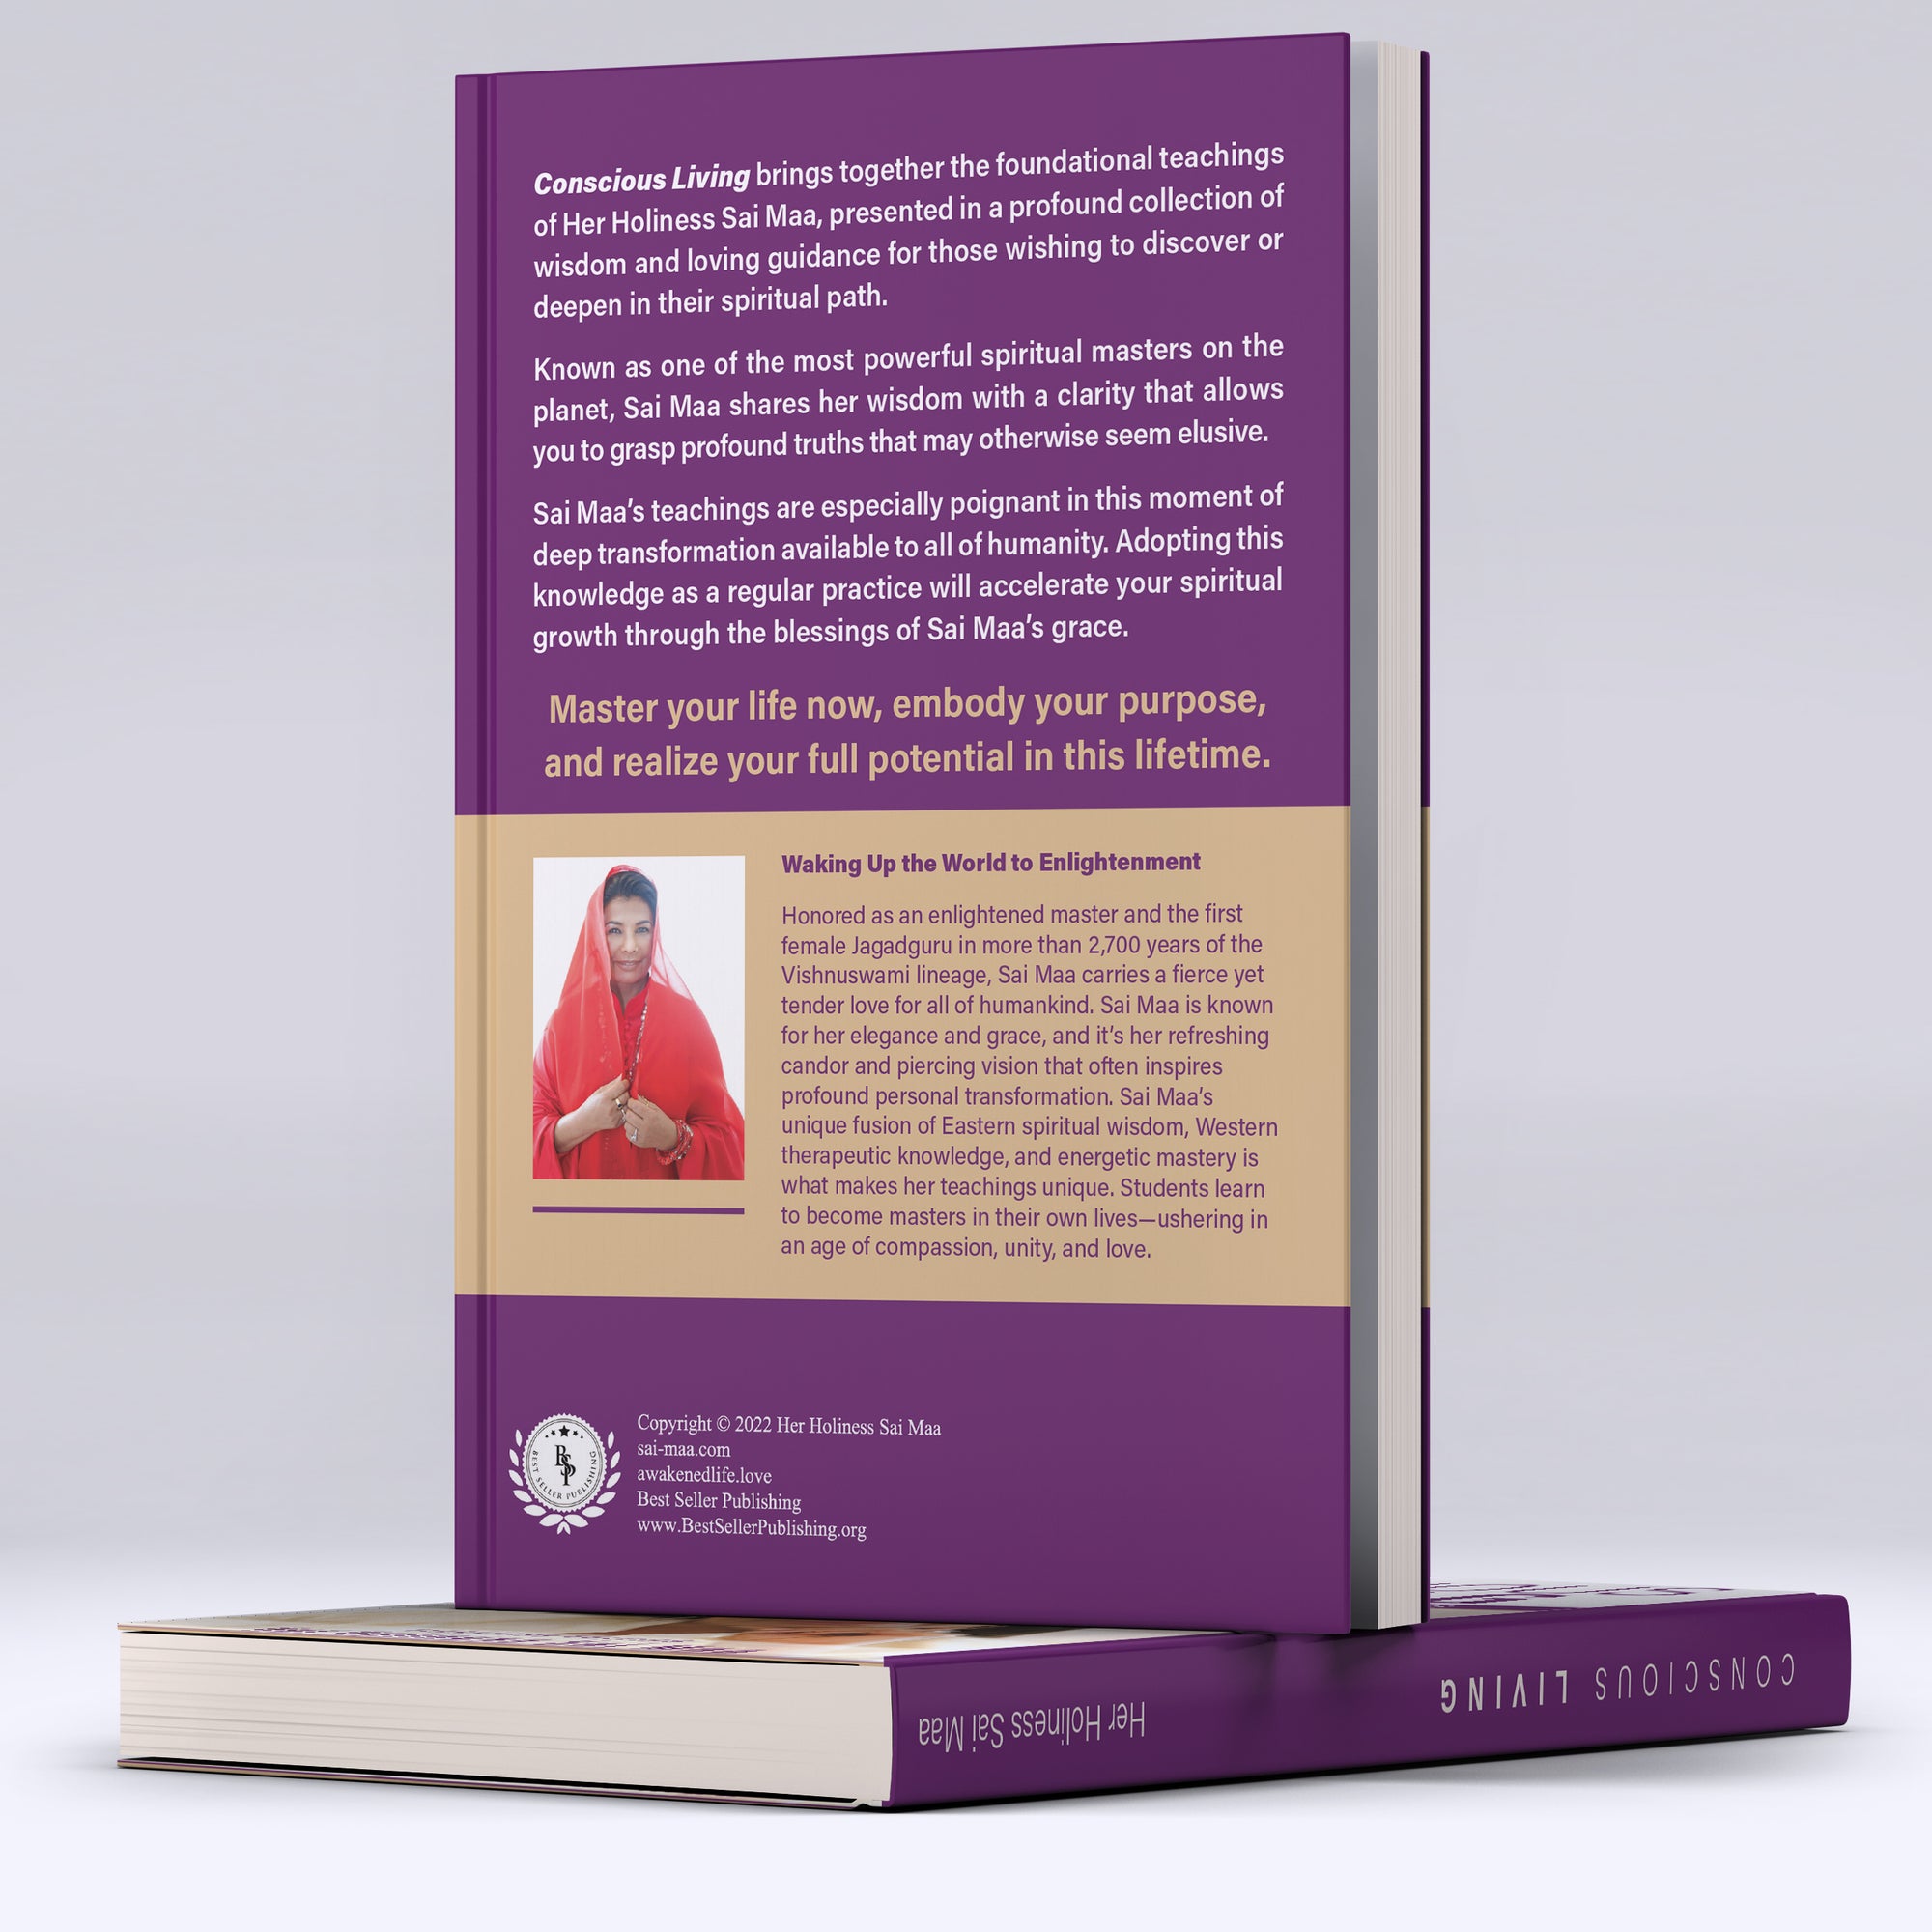 Conscious Living: The Power of Embracing Your Authentic You - SIGNATURE EDITION